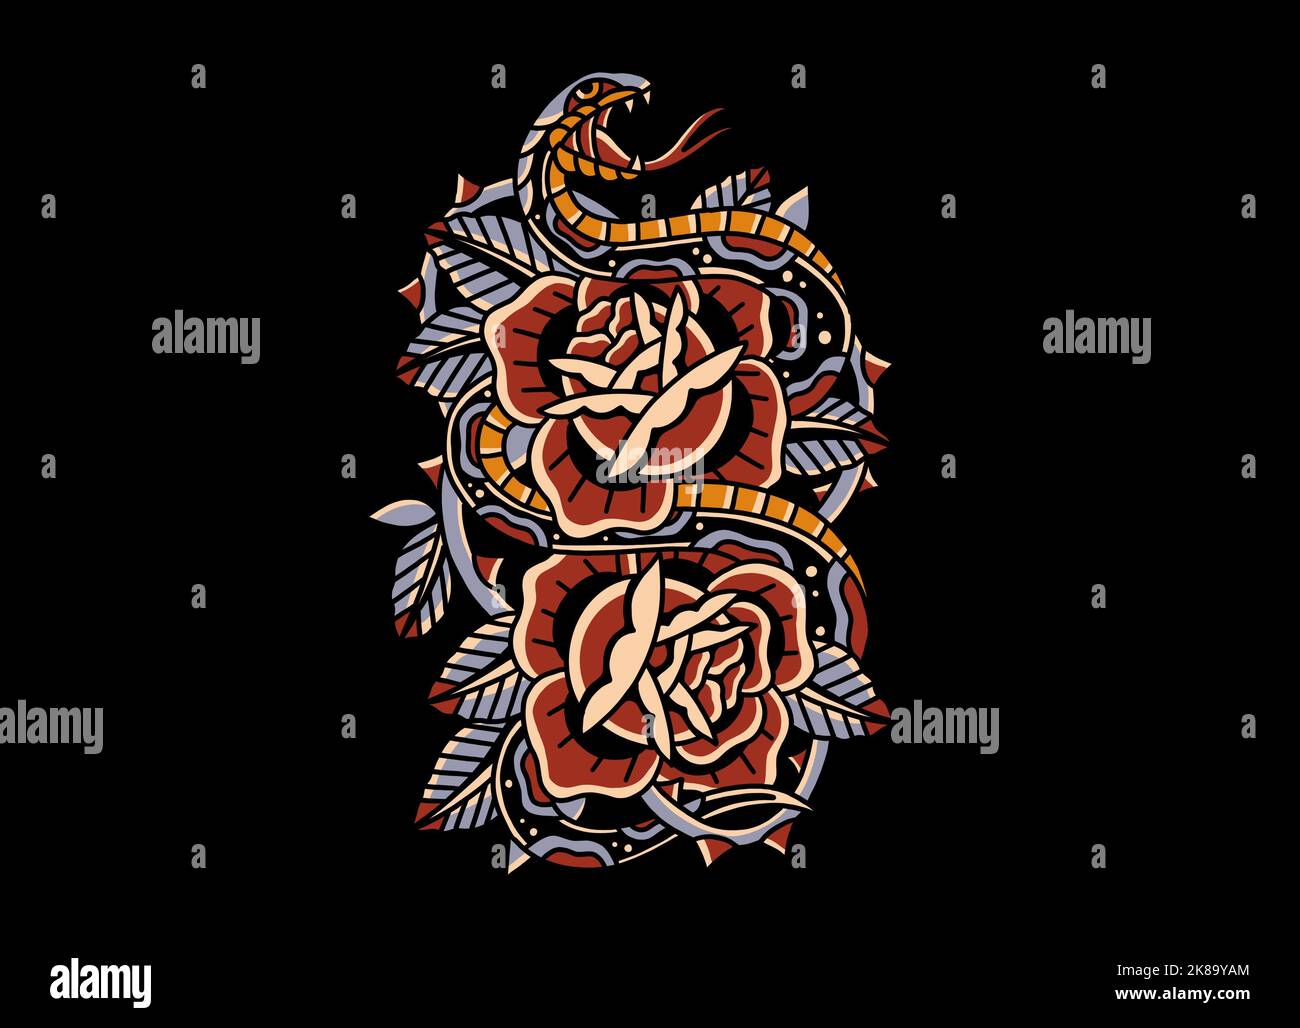 Old school traditional tattoo inspired cool graphic design illustration snake with roses for merchandise t shirts stickers wallpapers label logos Stock Photo